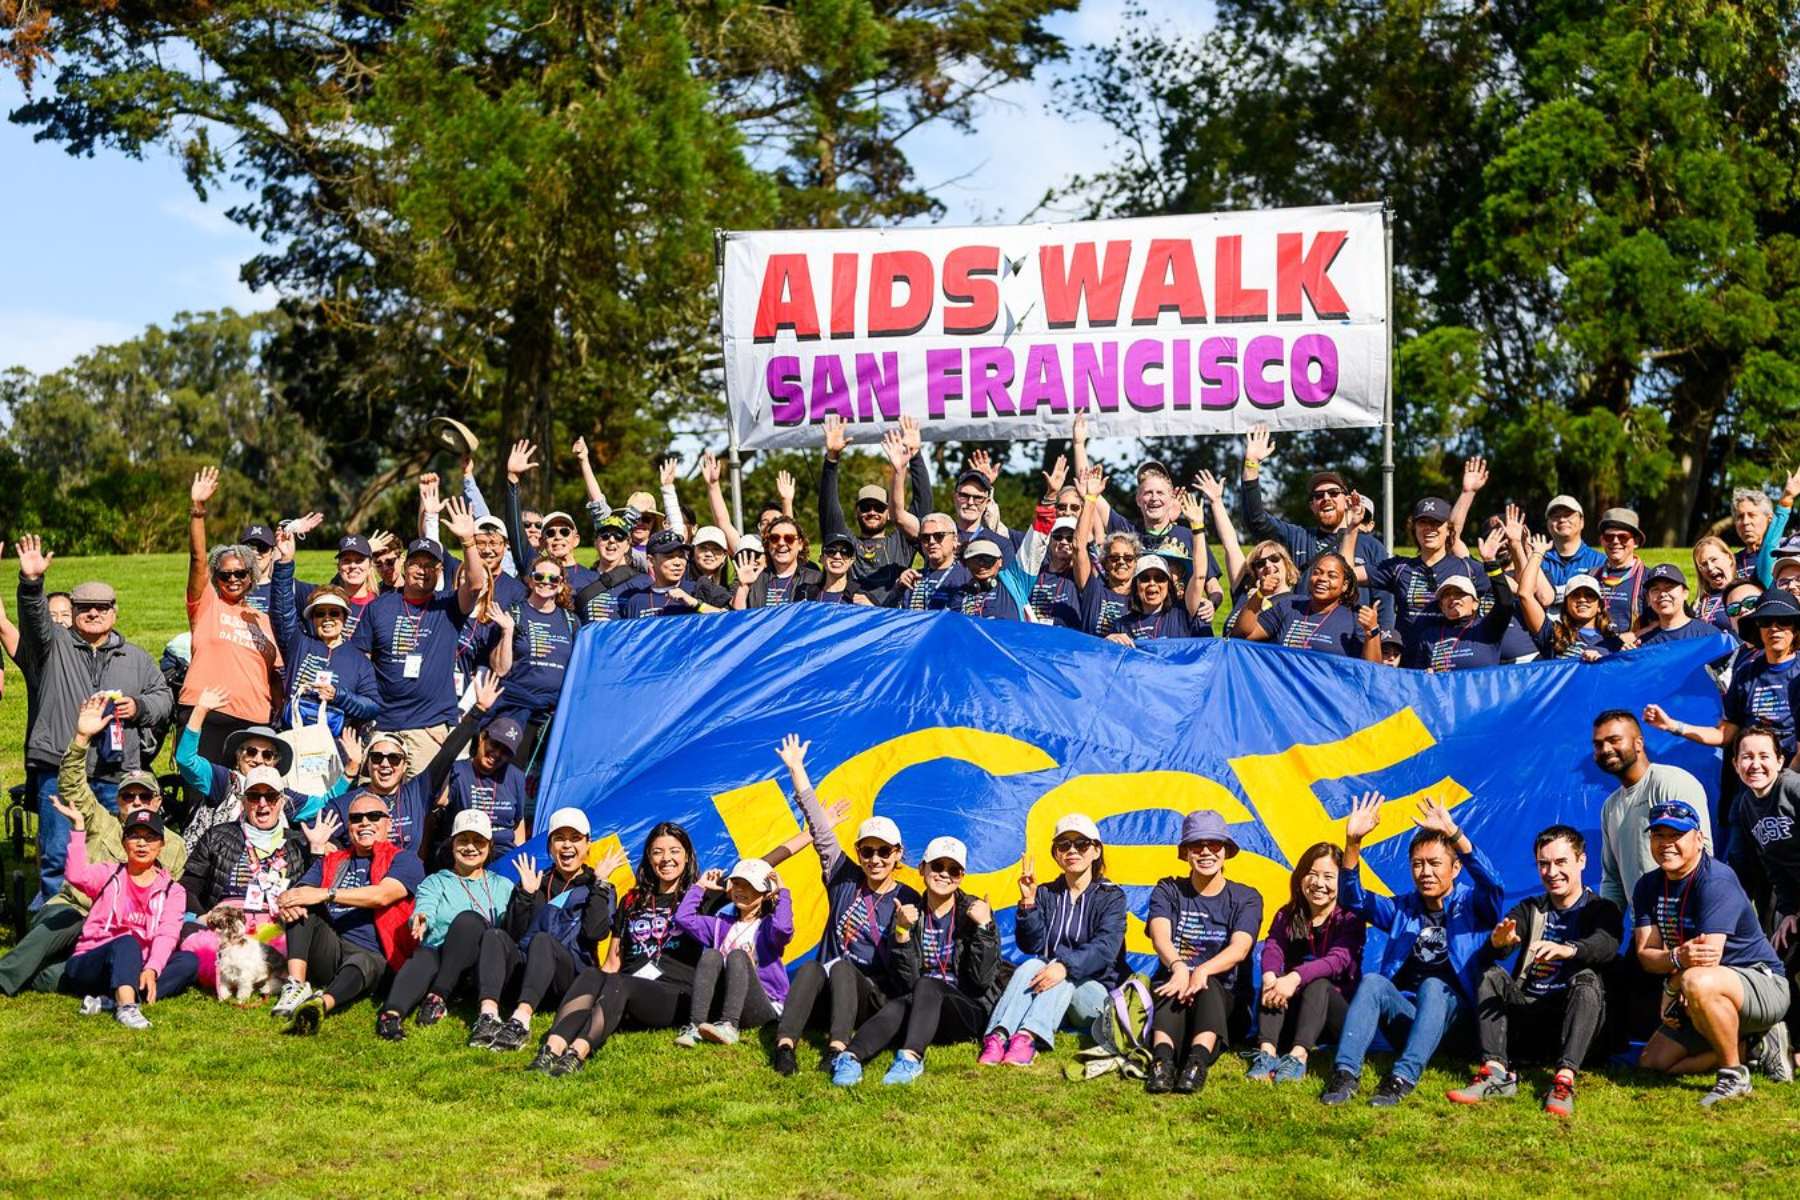 group photo of UCSF AIDS walkers